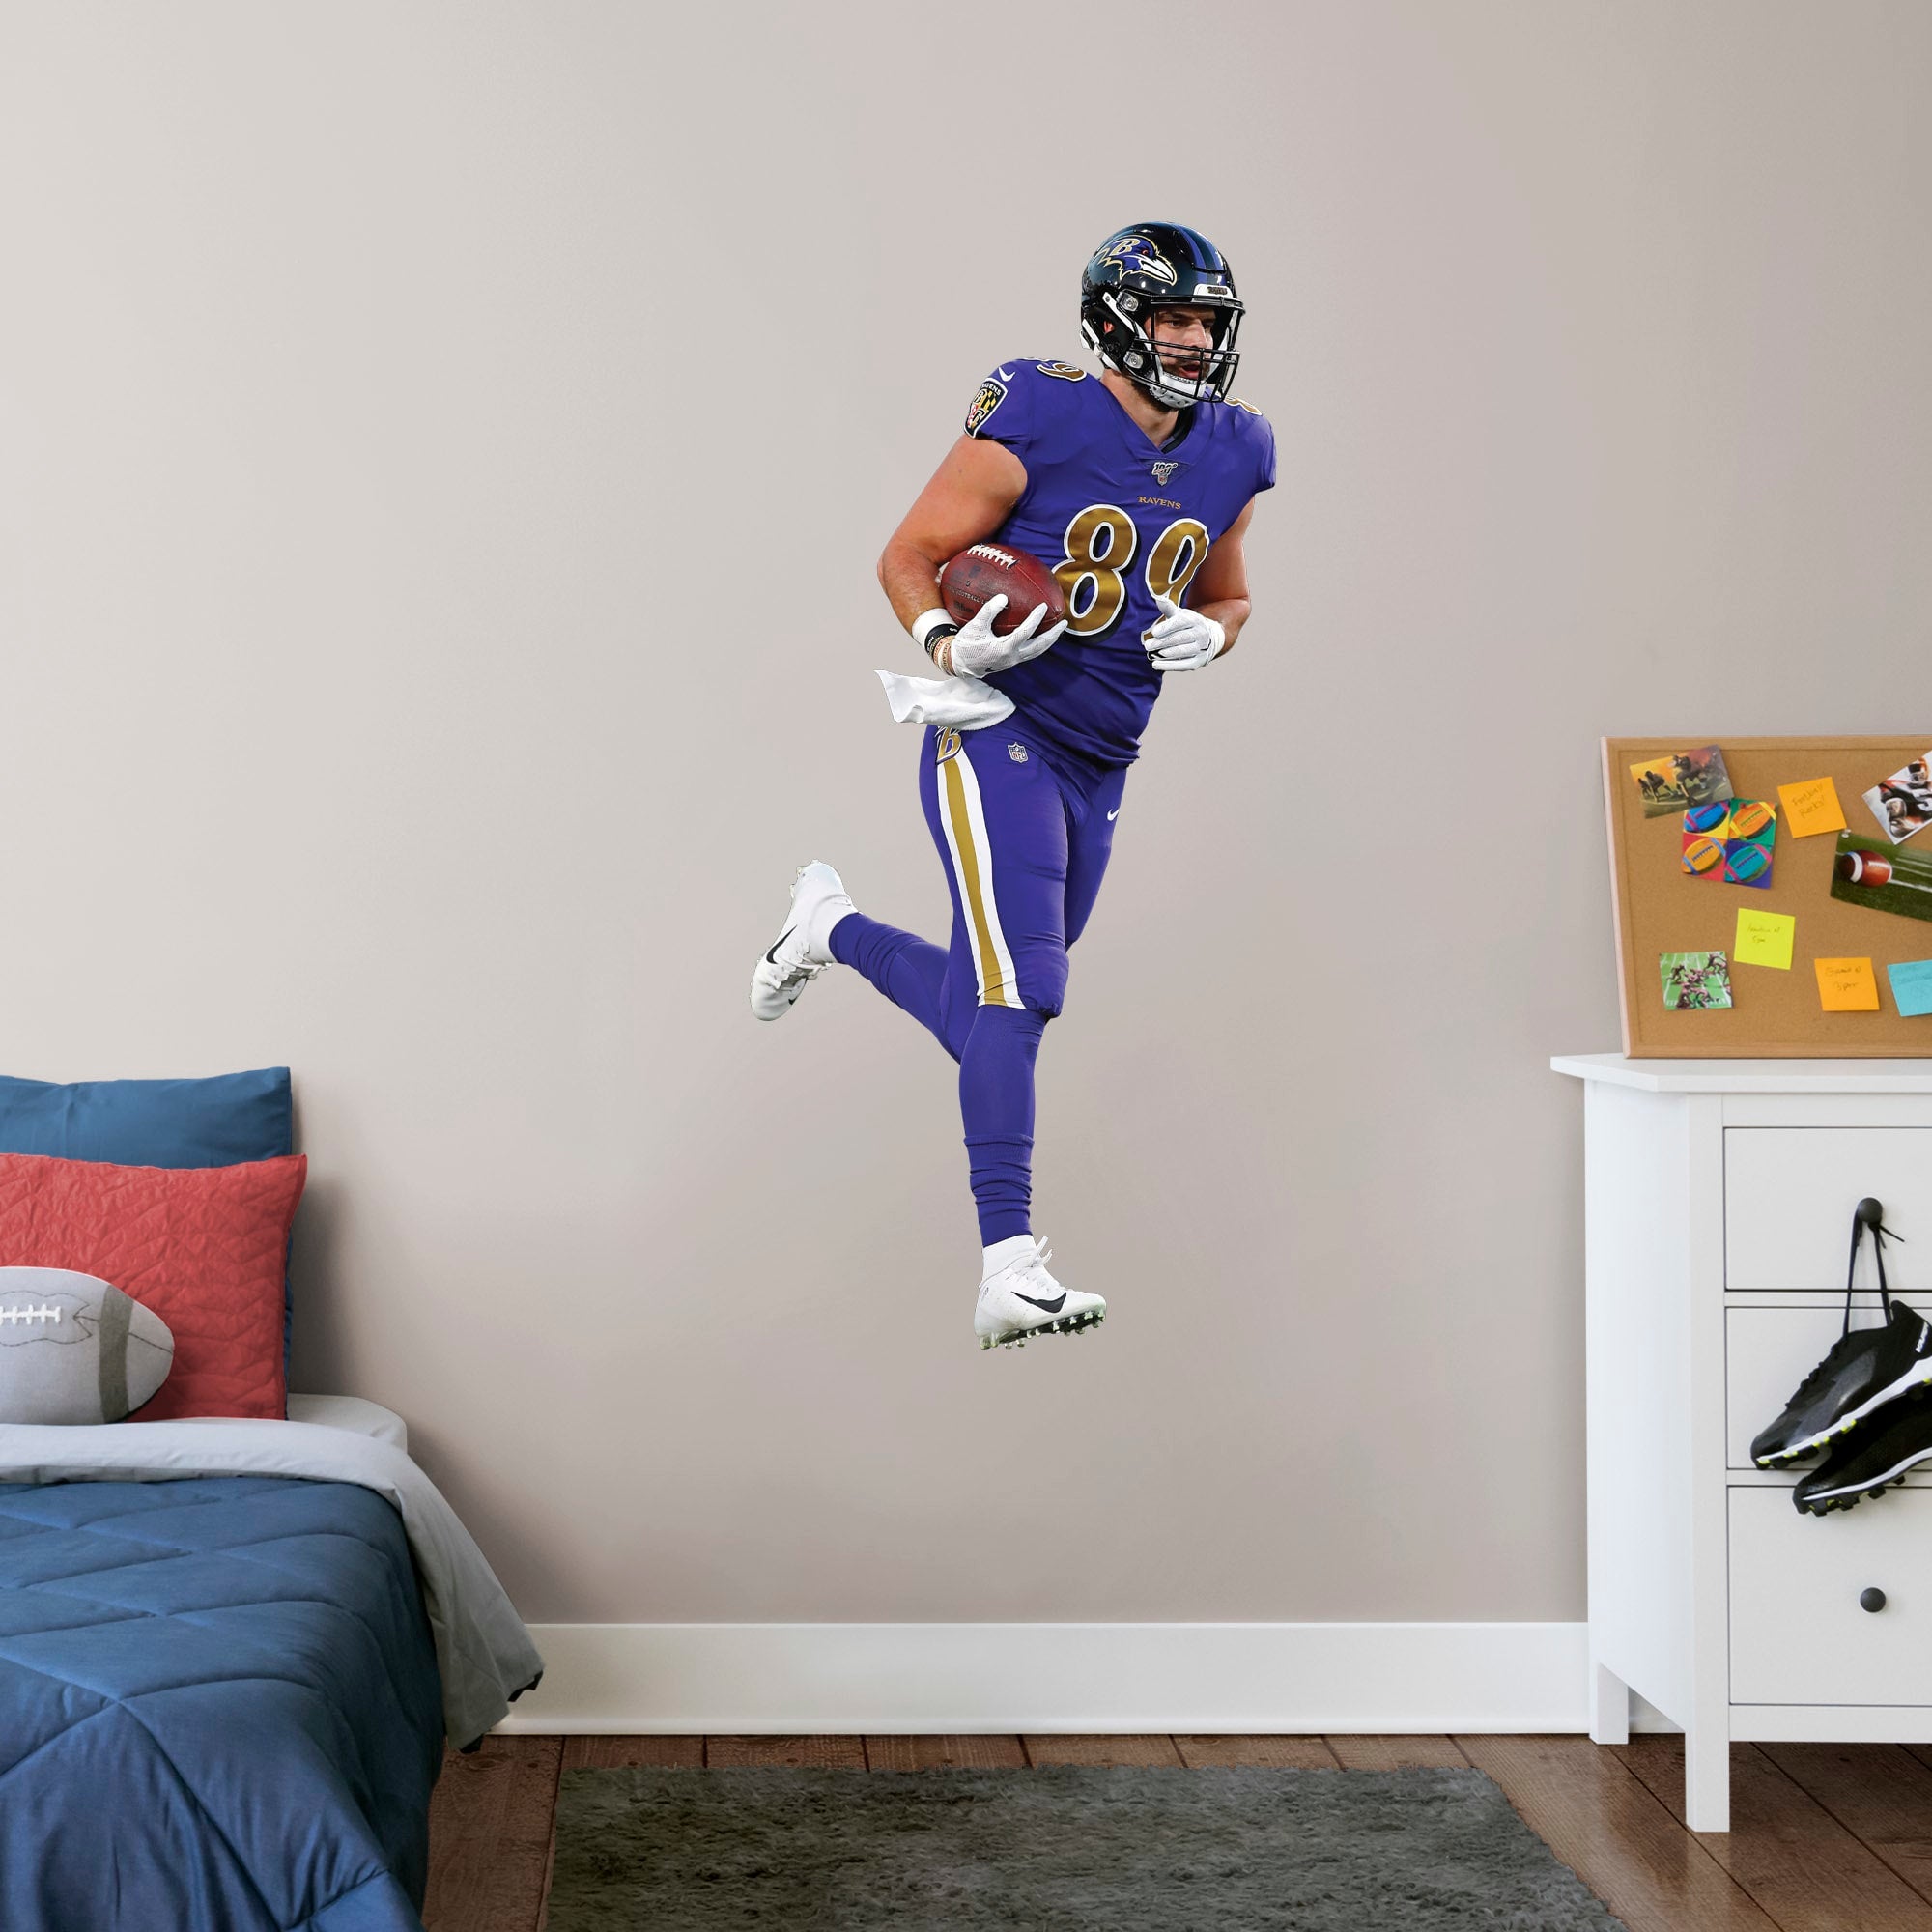 Mark Andrews for Baltimore Ravens - Officially Licensed NFL Removable Wall Decal Giant Athlete + 2 Decals (24"W x 51"H) by Fathe